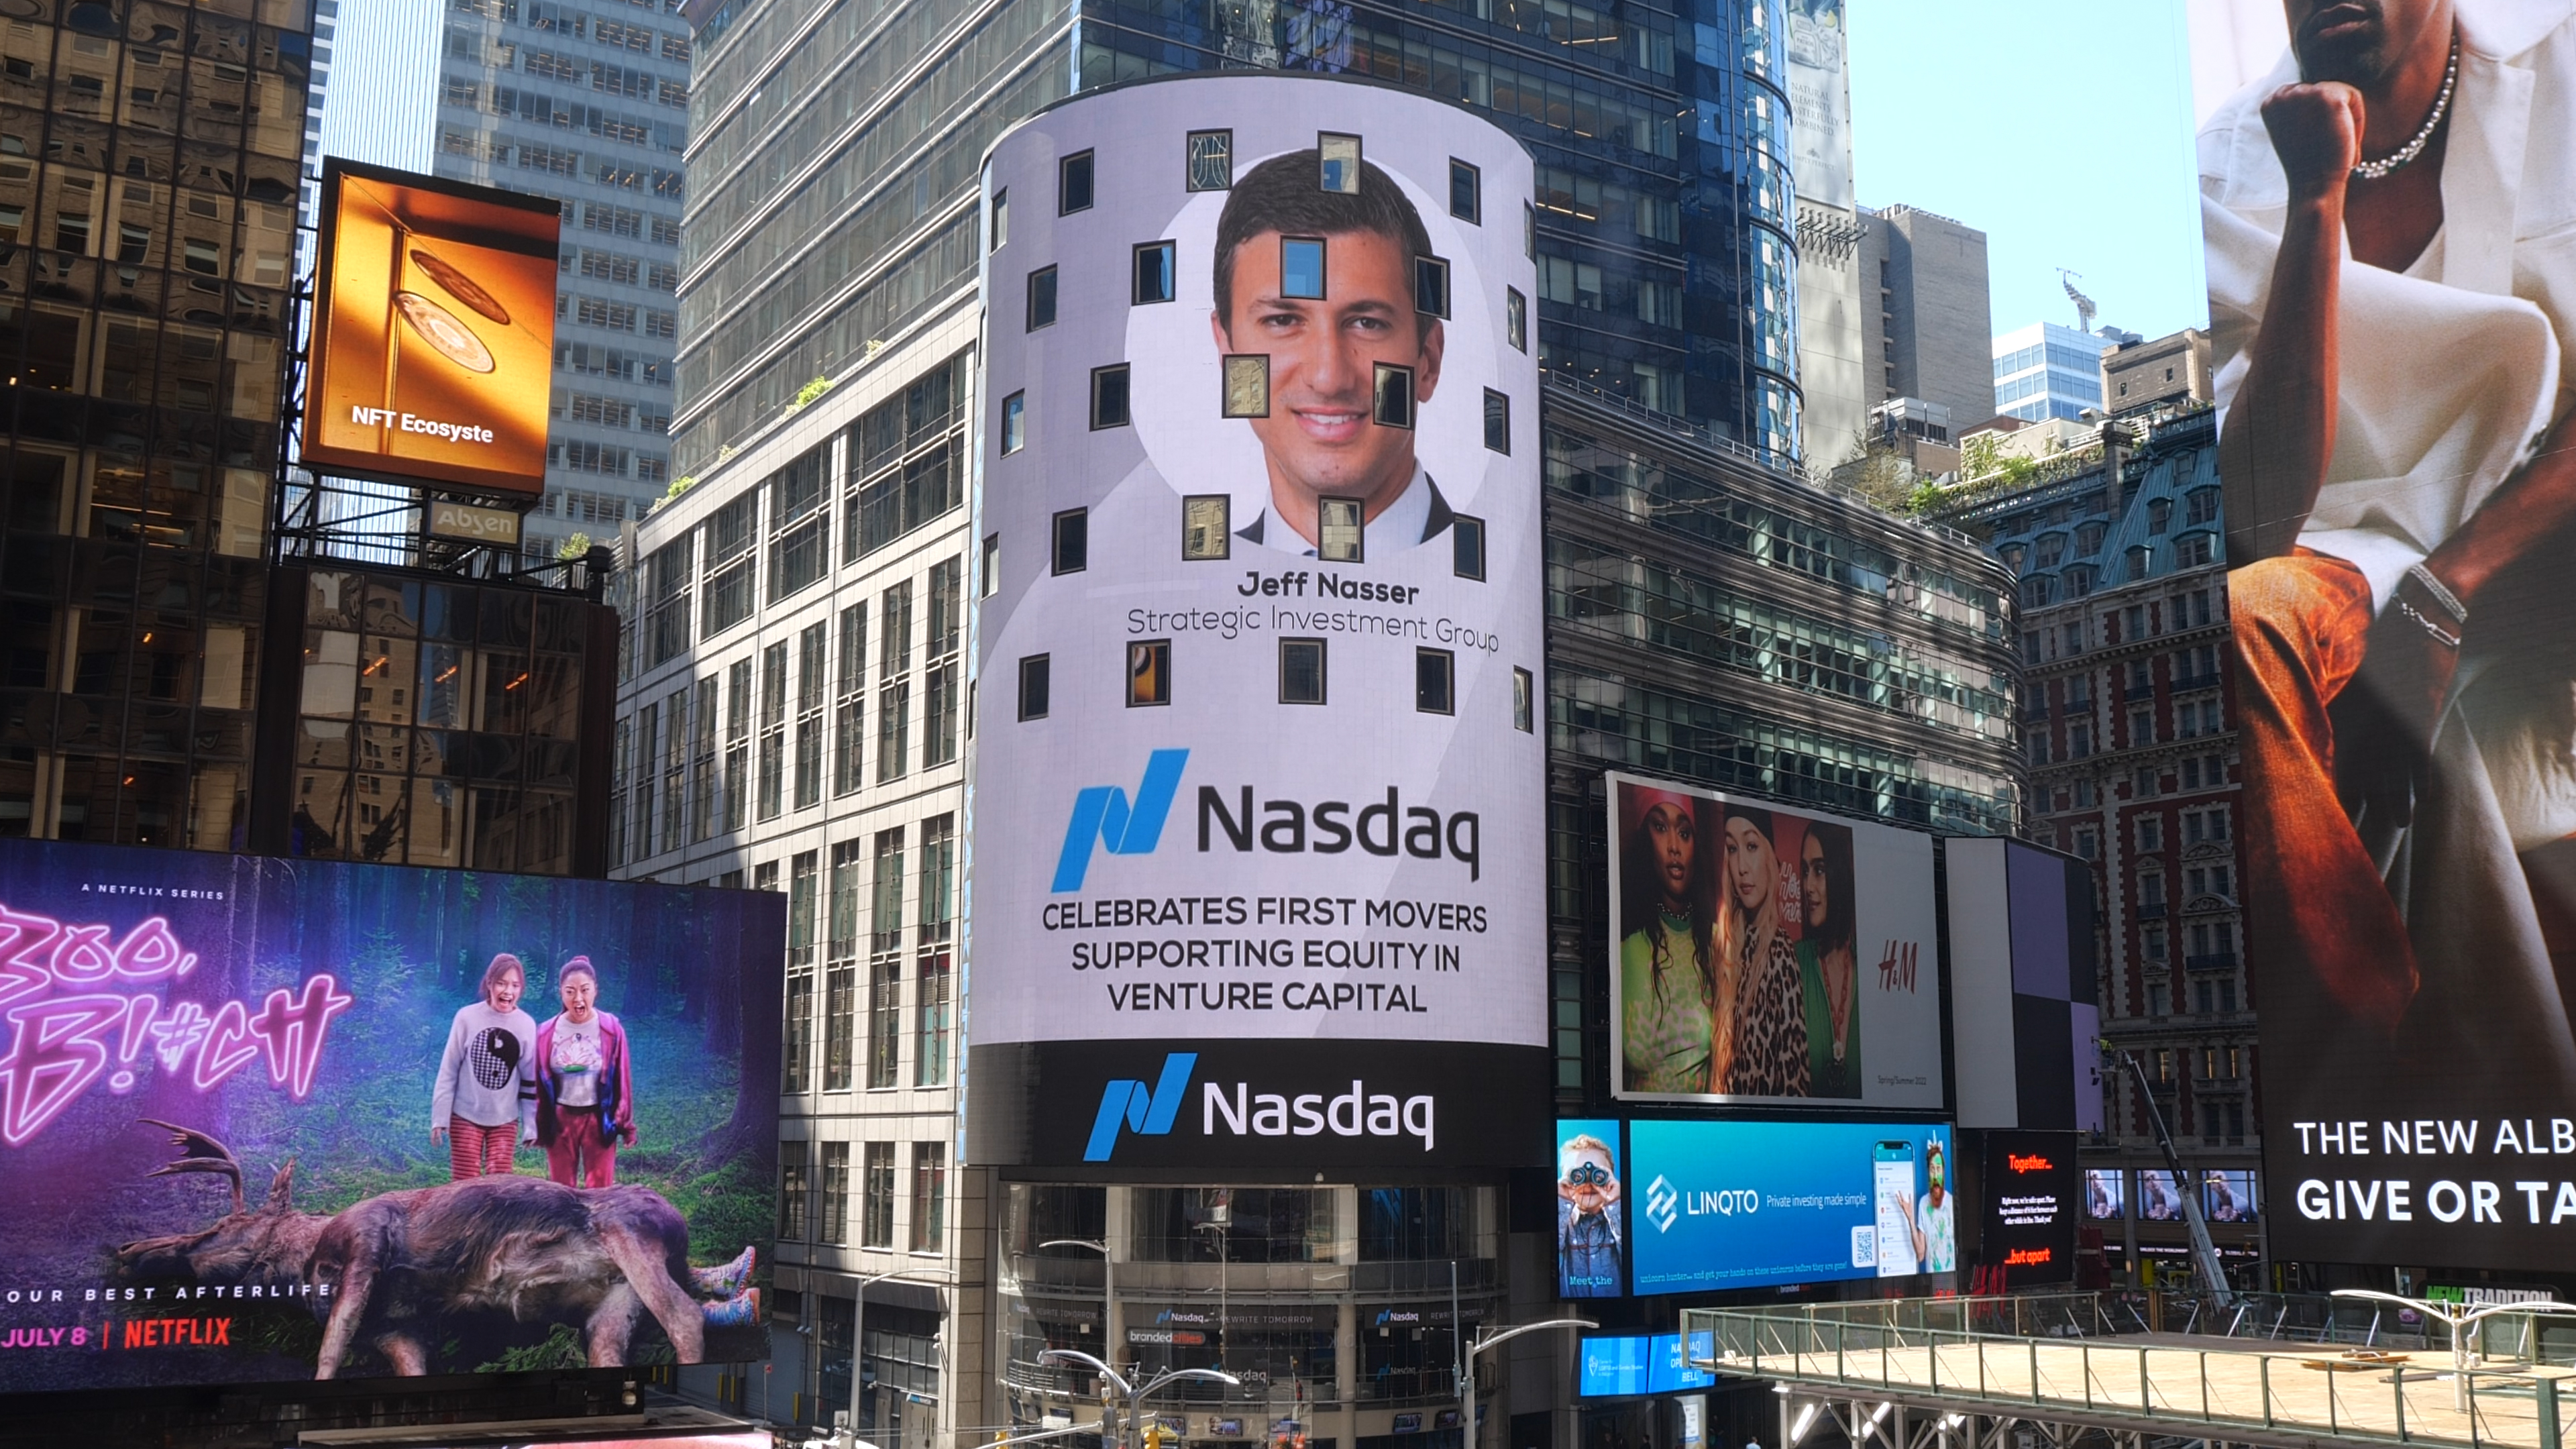 Jeff Nasser - VEP image projected on Nasdaq's building in Time Square